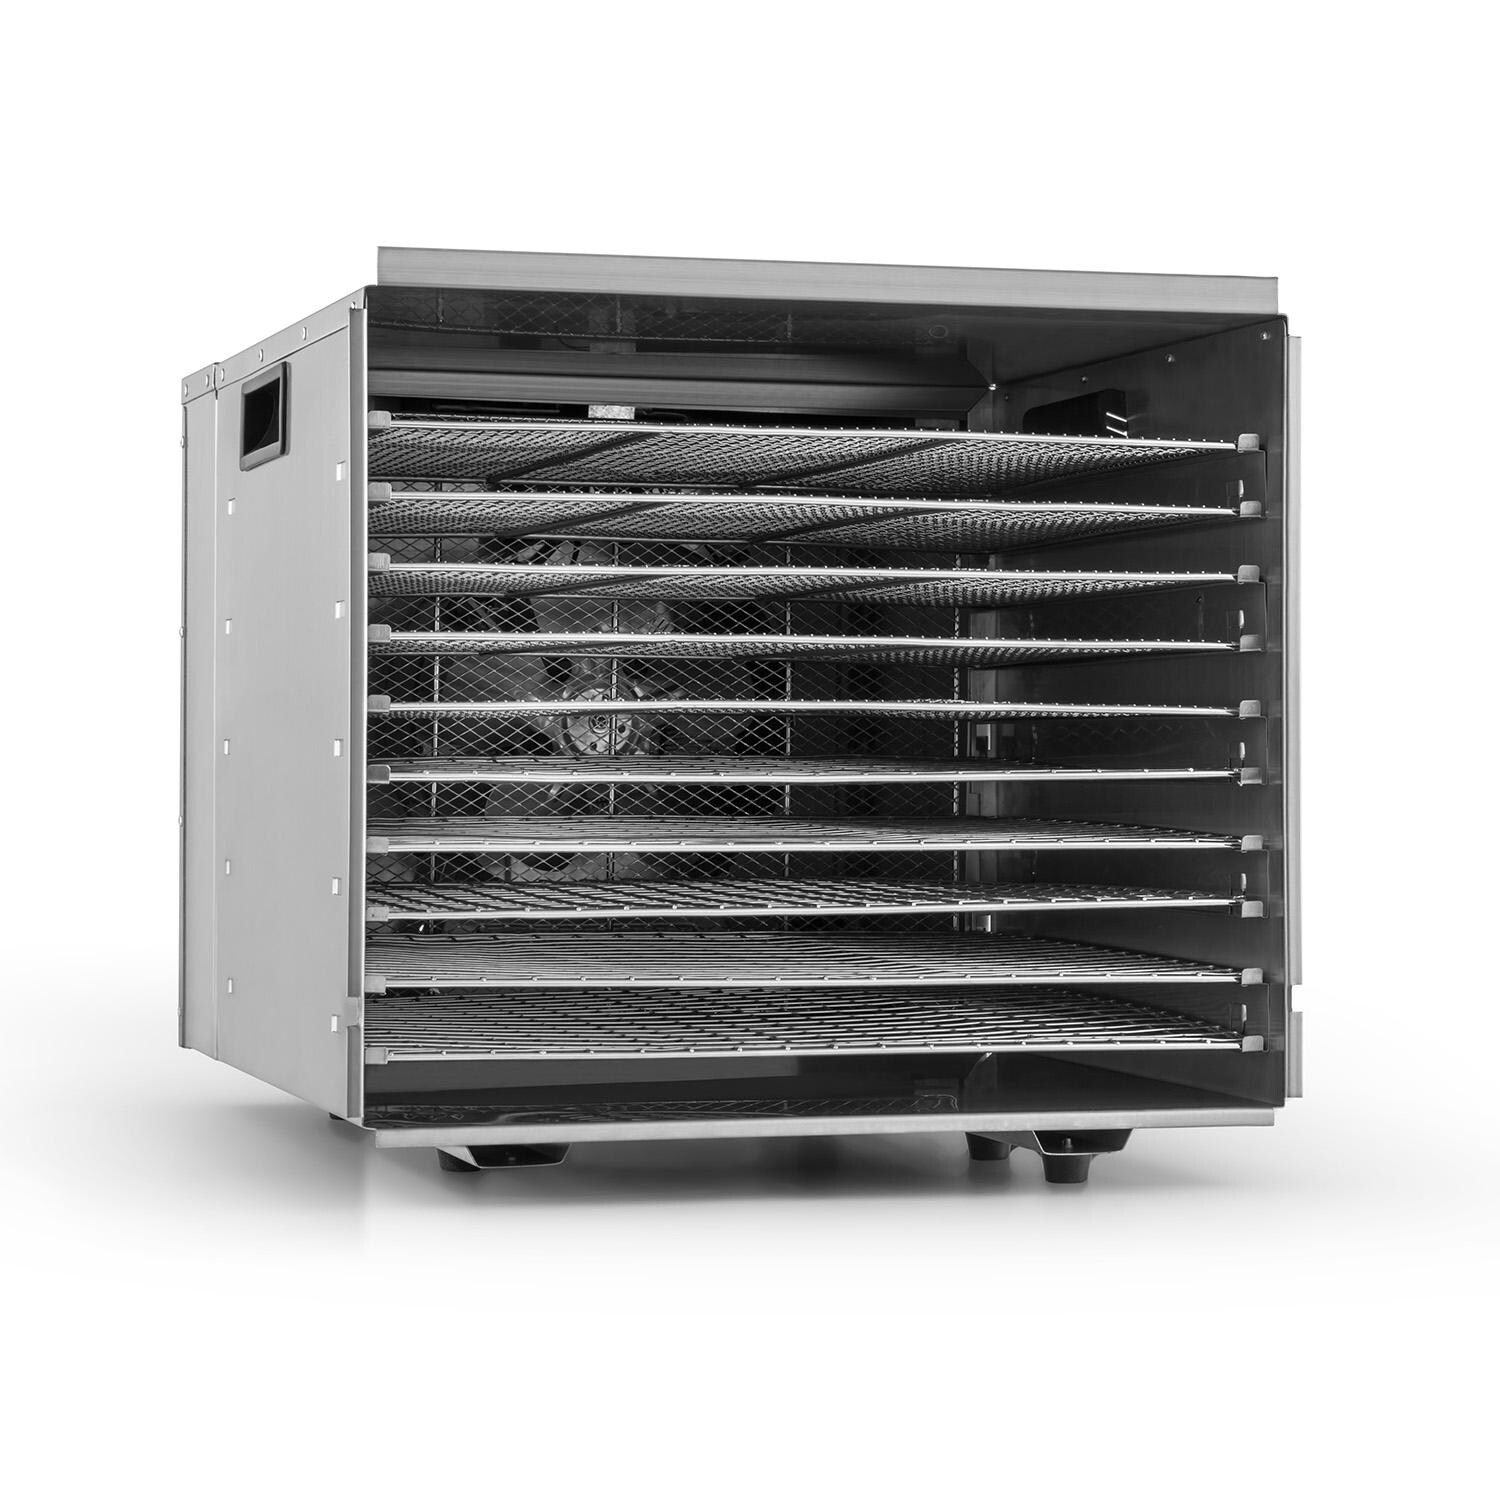 https://ak1.ostkcdn.com/images/products/is/images/direct/60f38842898fc03b4570ebab5d1ab947a315695d/Della-Commercial-1200W-10-Tray-Food-Dehydrator-Nut-Durable-Fruit-Sausage-Jerky-Dryer%2C-Stainless-Steel.jpg